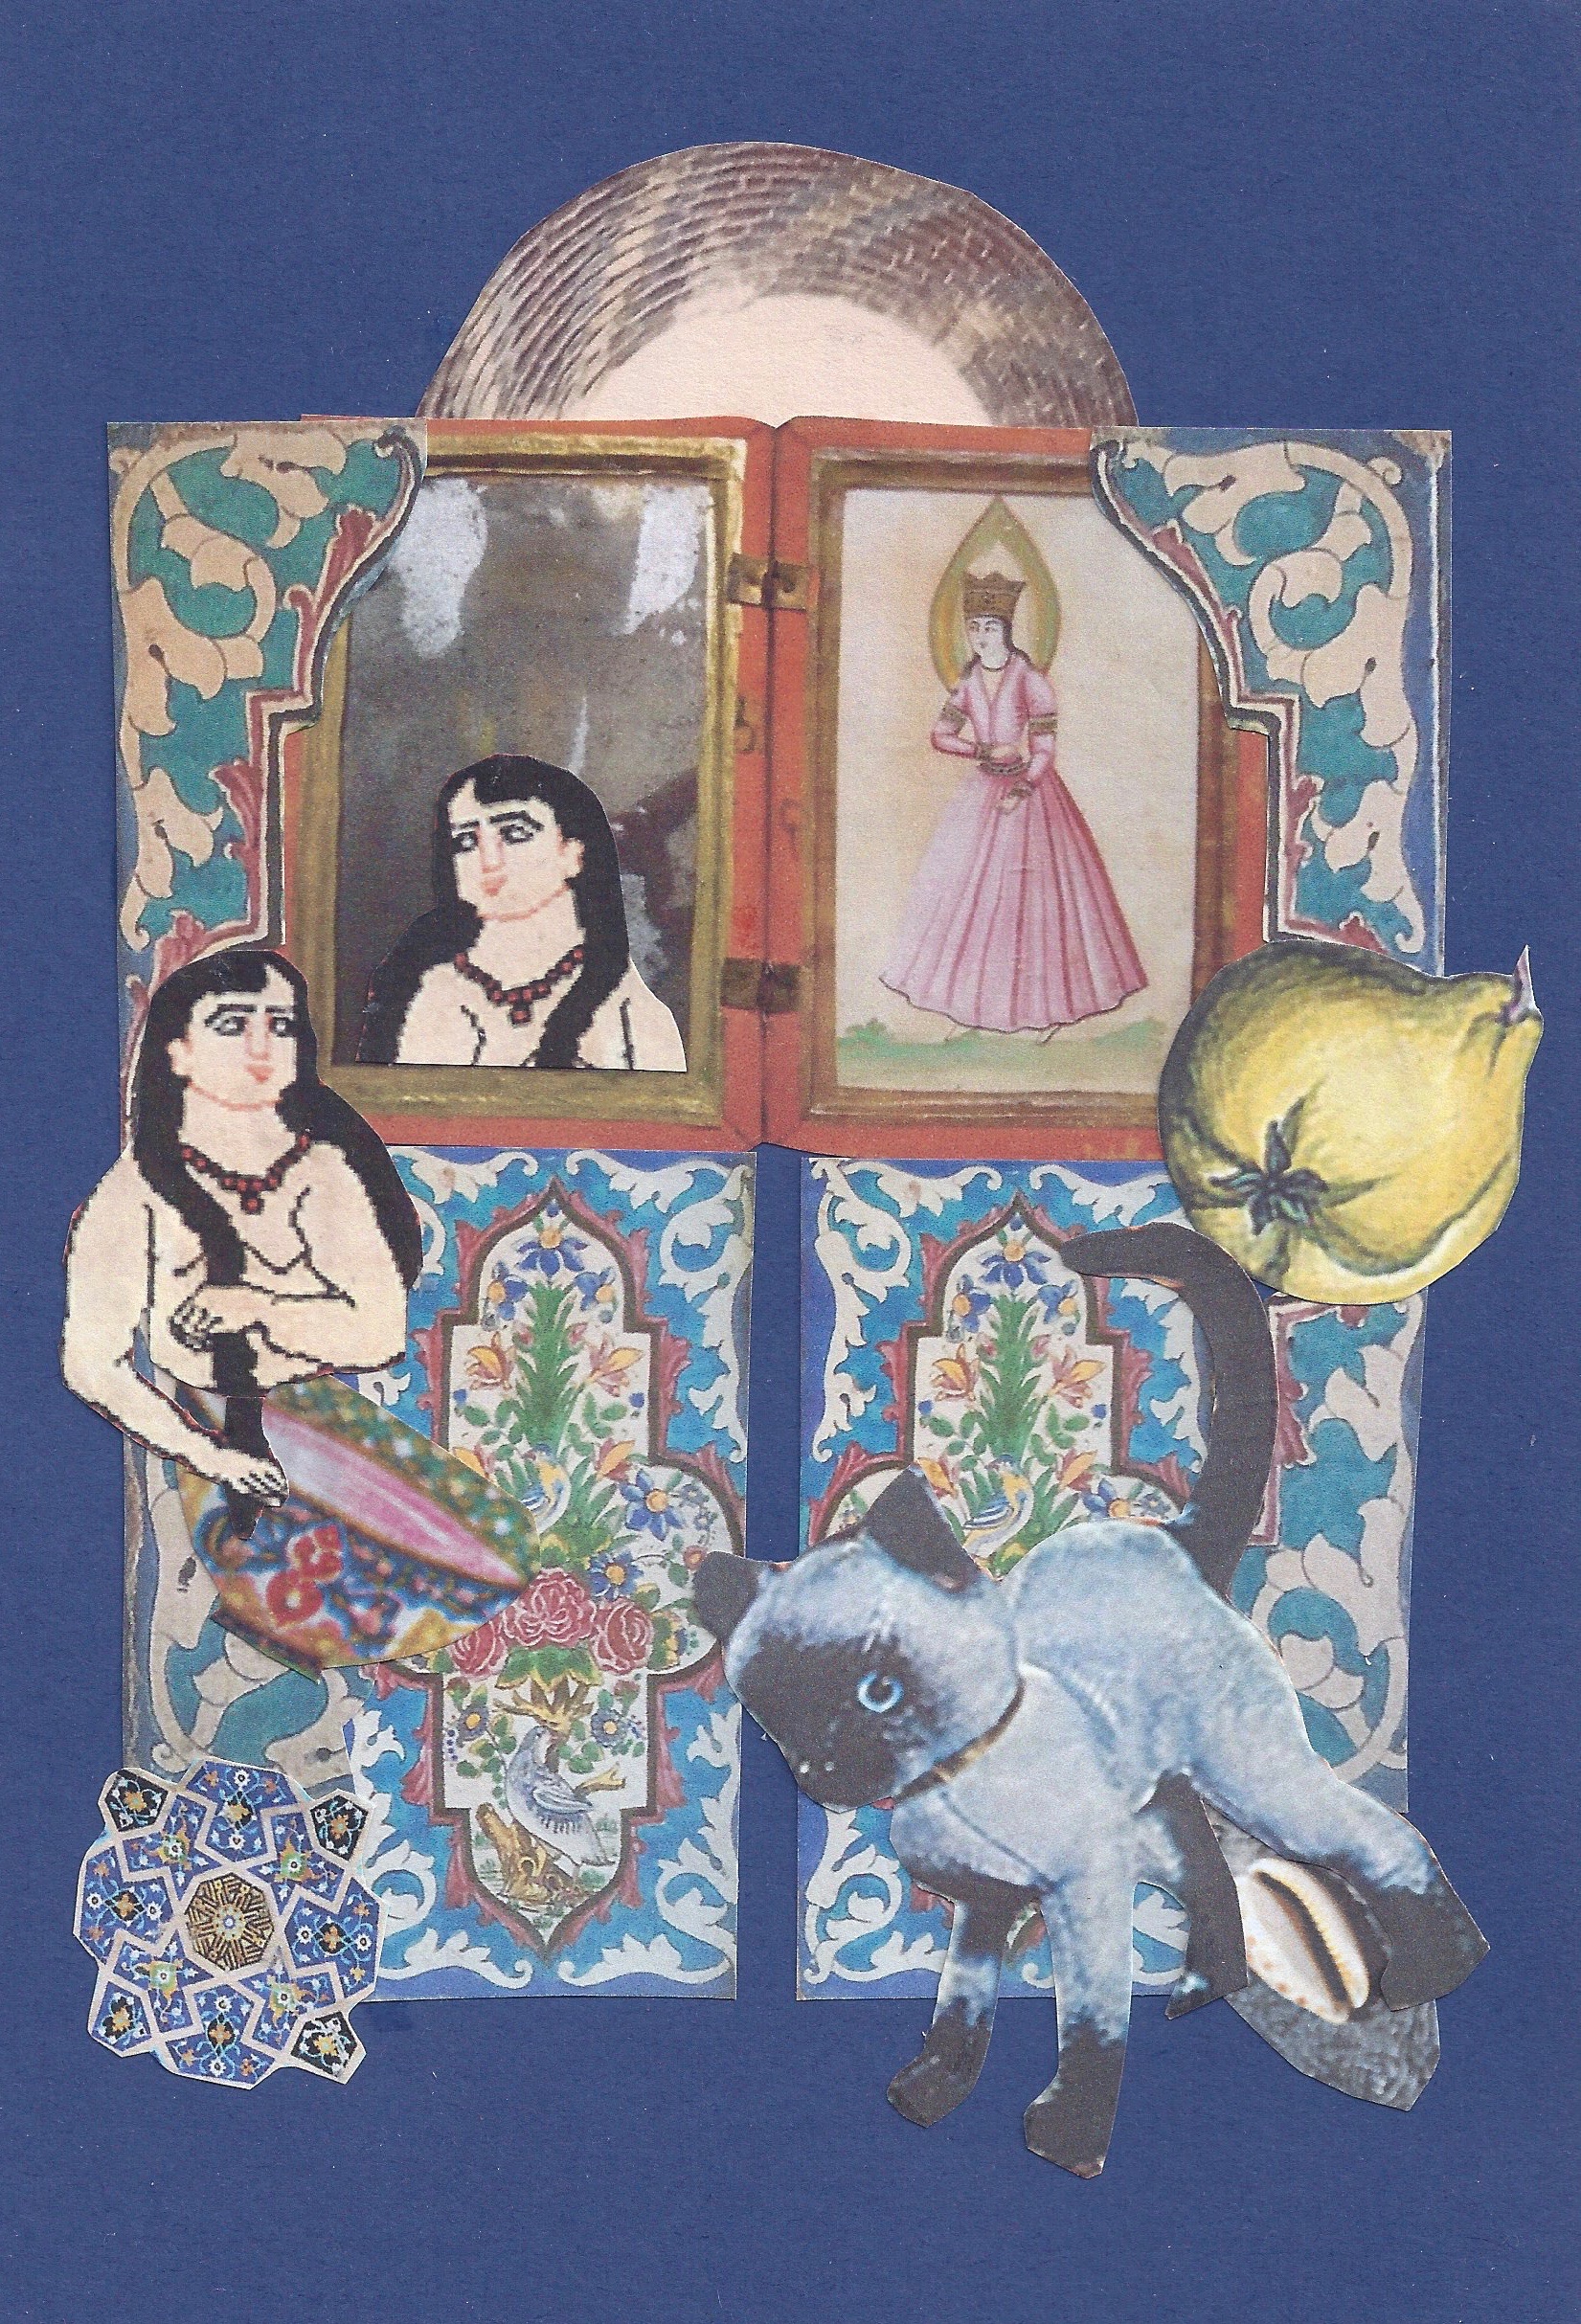 Edition three out of ten of "Her Ladyship Makes a Pact with a Hungry Cat," by Iranian artist Afsoon